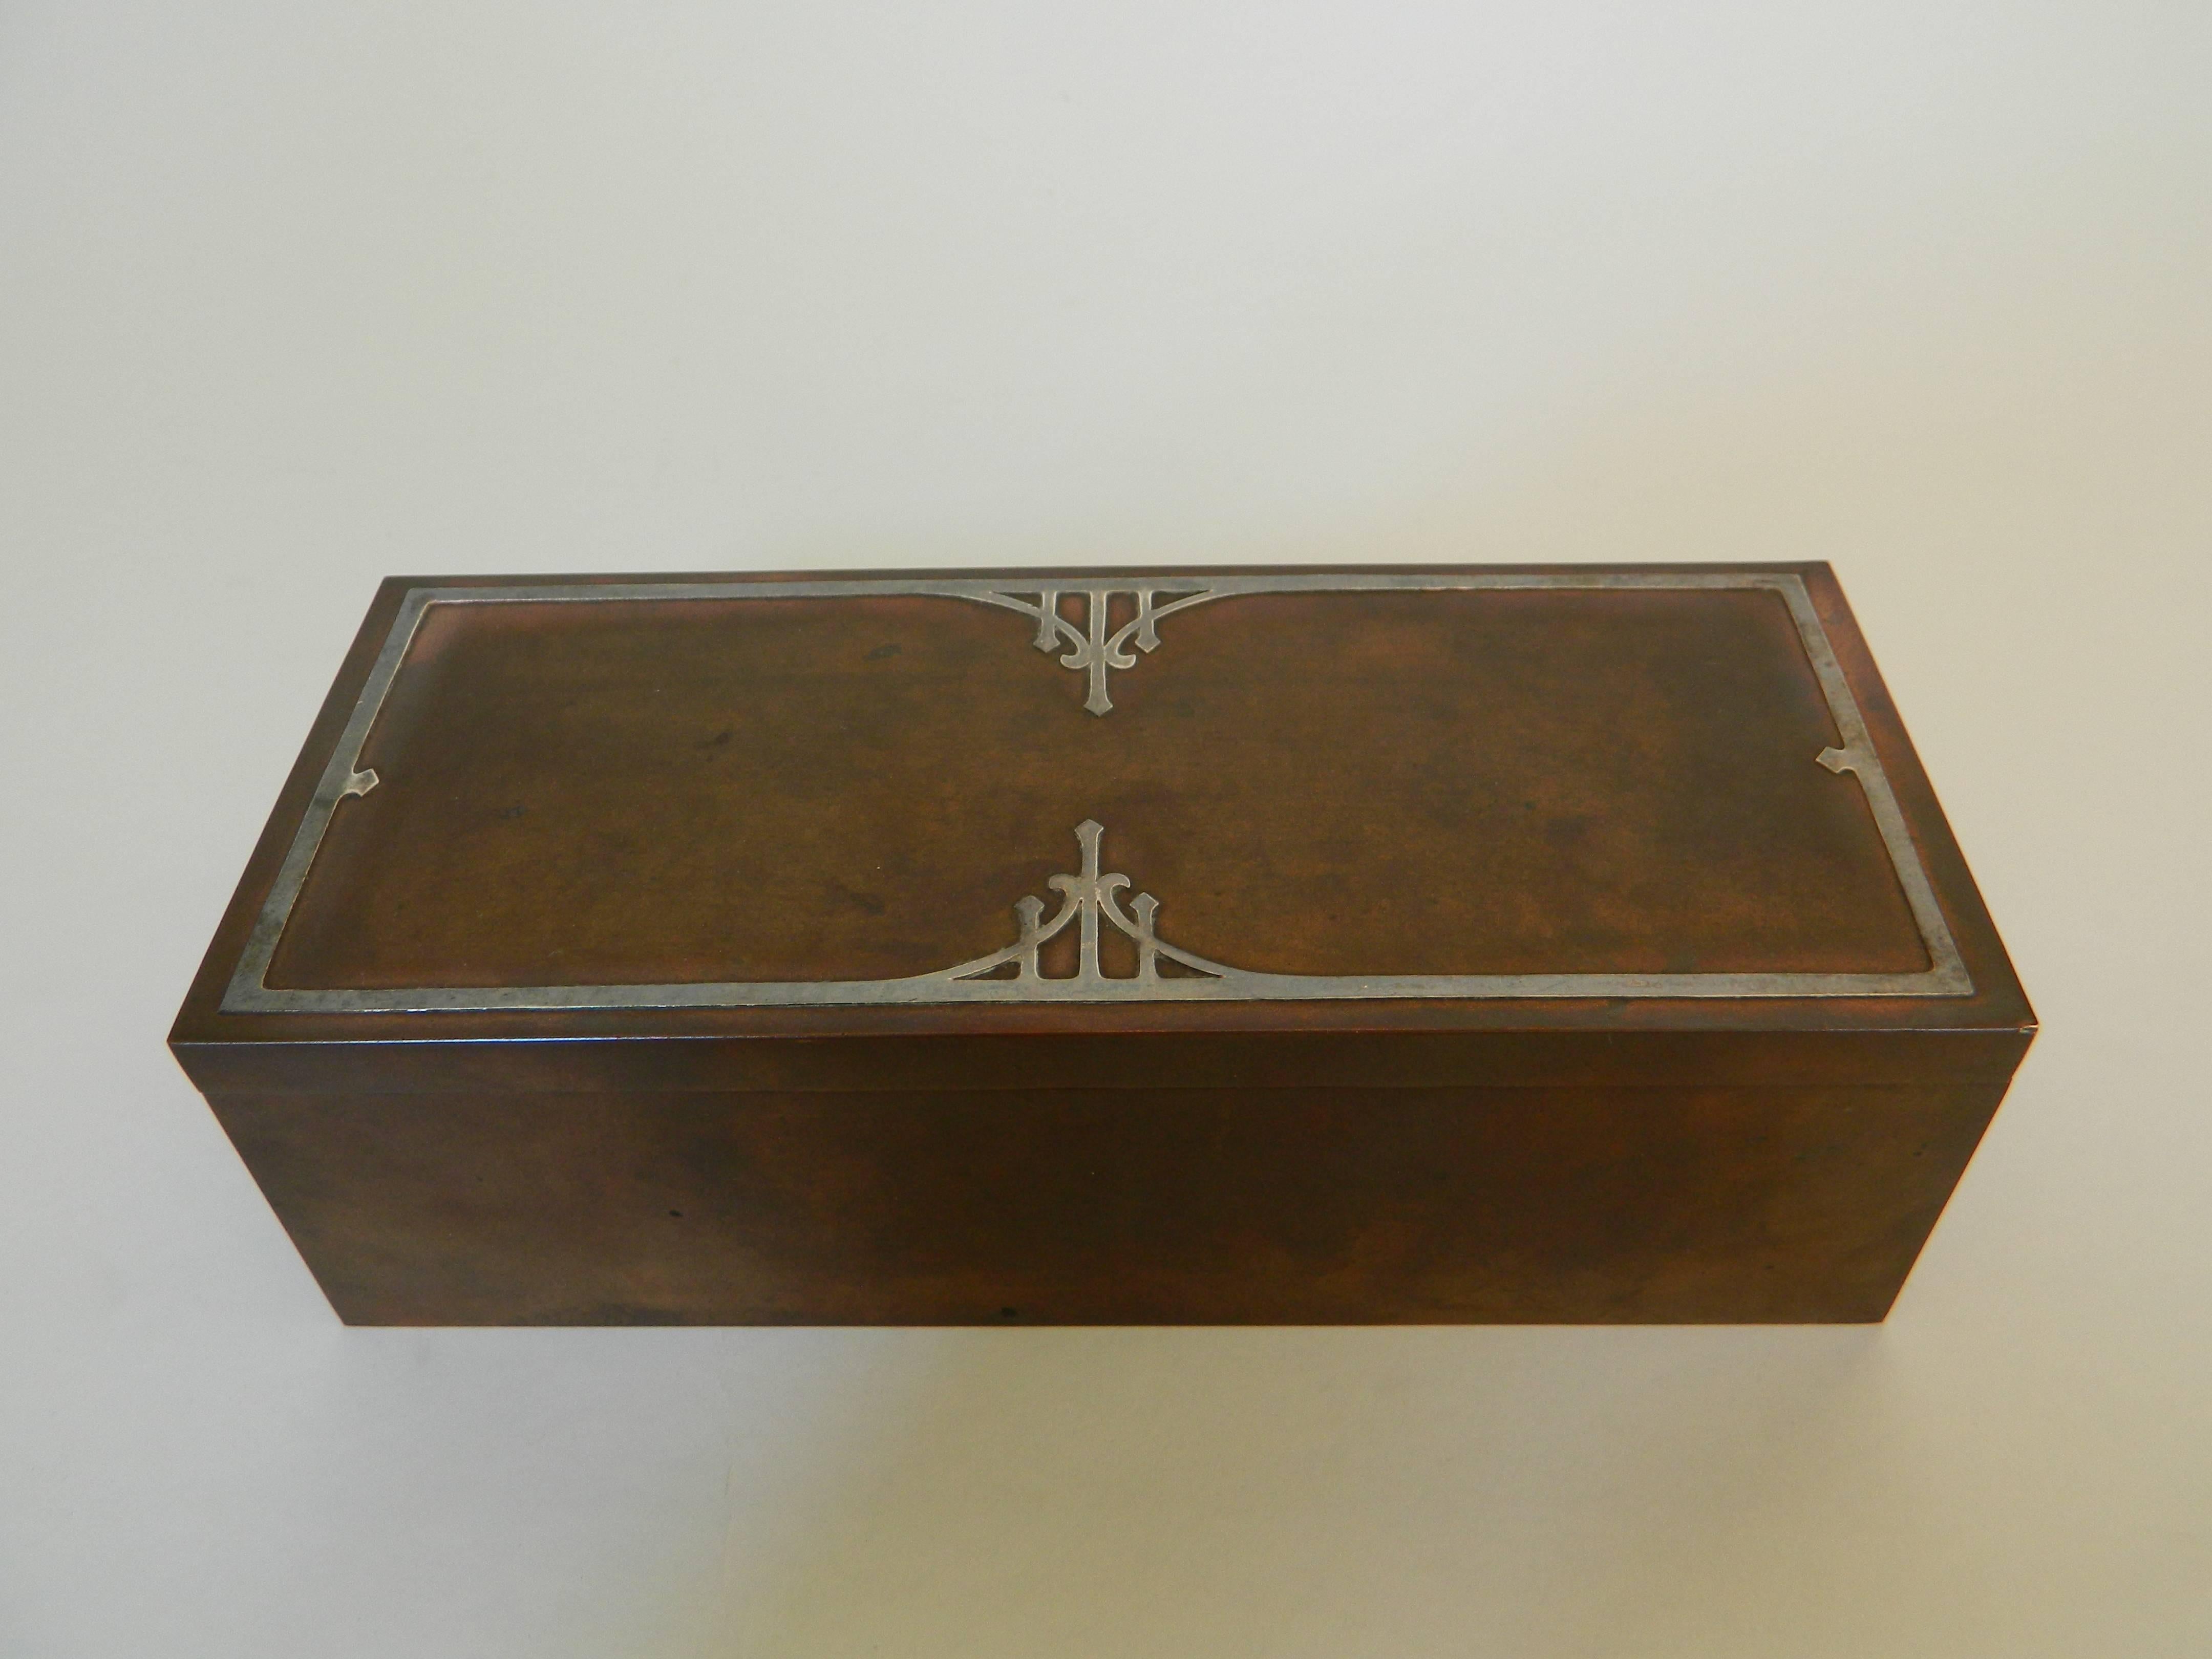 Heintz Art Metal Shop, or AMHS engraving rests on bottom, along with August 27, 1912 date, which signifies the definitive patent for applying sterling silver to bronze without solder. A fine example of American Arts & Crafts movement. the box is in